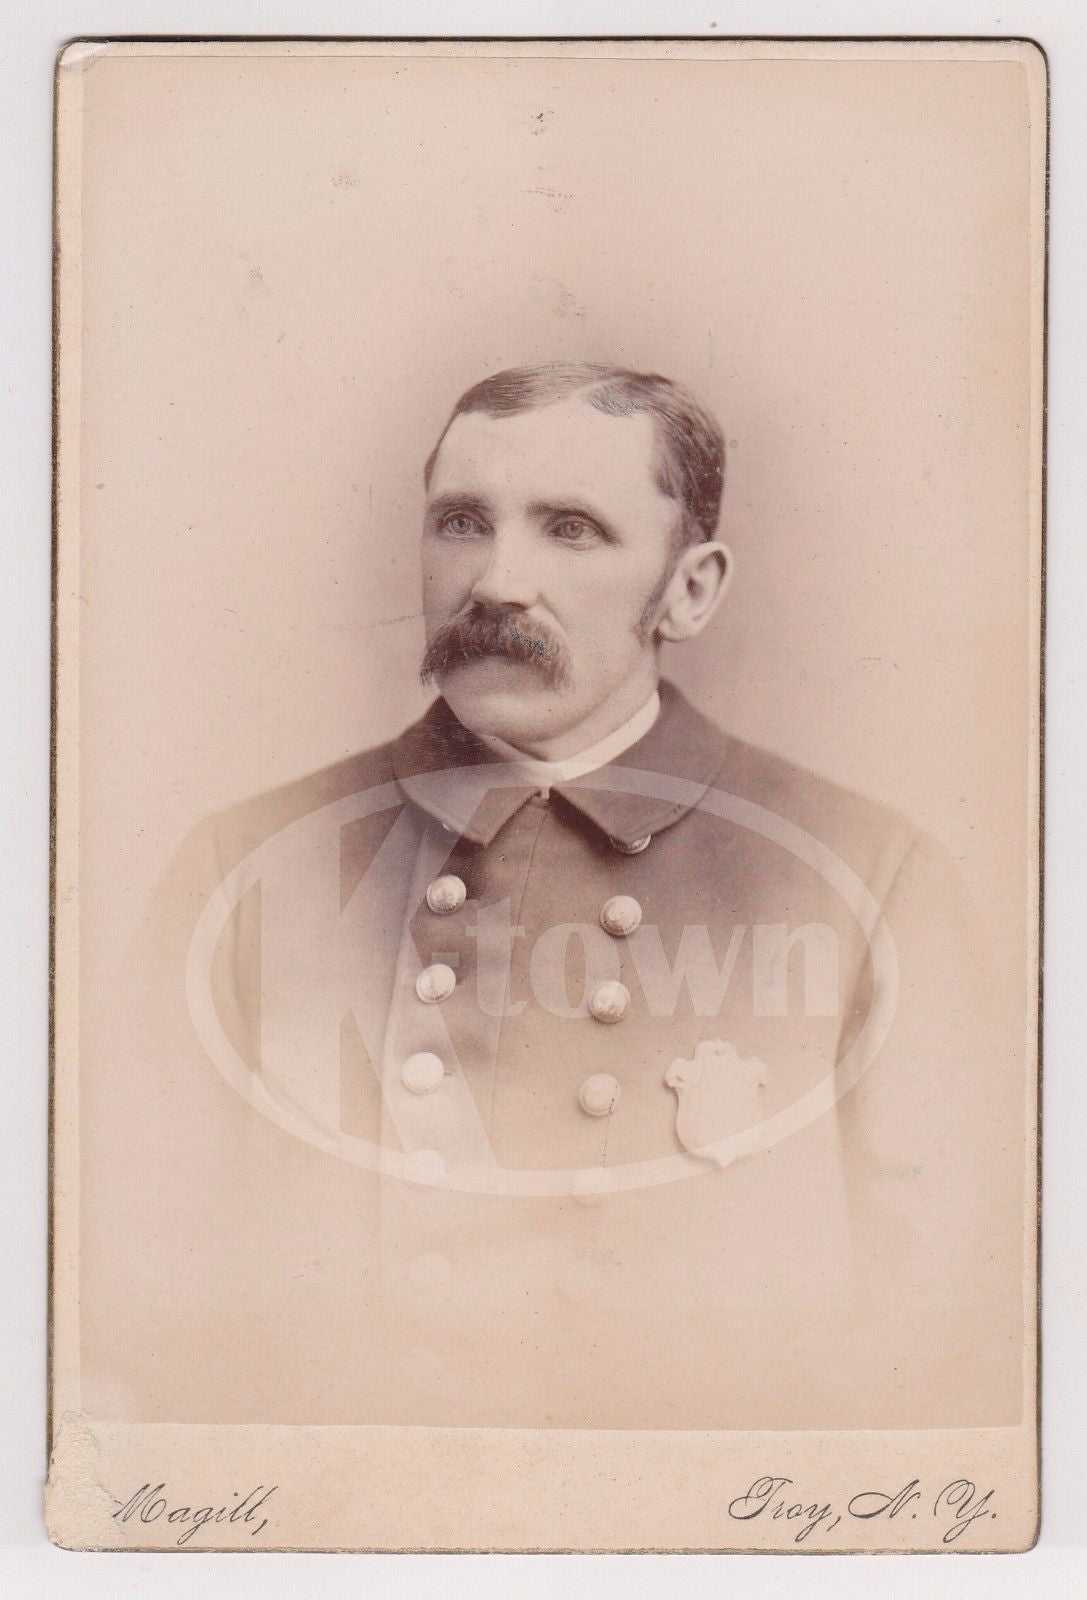 TROY NEW YORK POLICE OFFICER IN UNIFORM ANTIQUE CABINET PHOTO BY ZEPH MAGILL - K-townConsignments